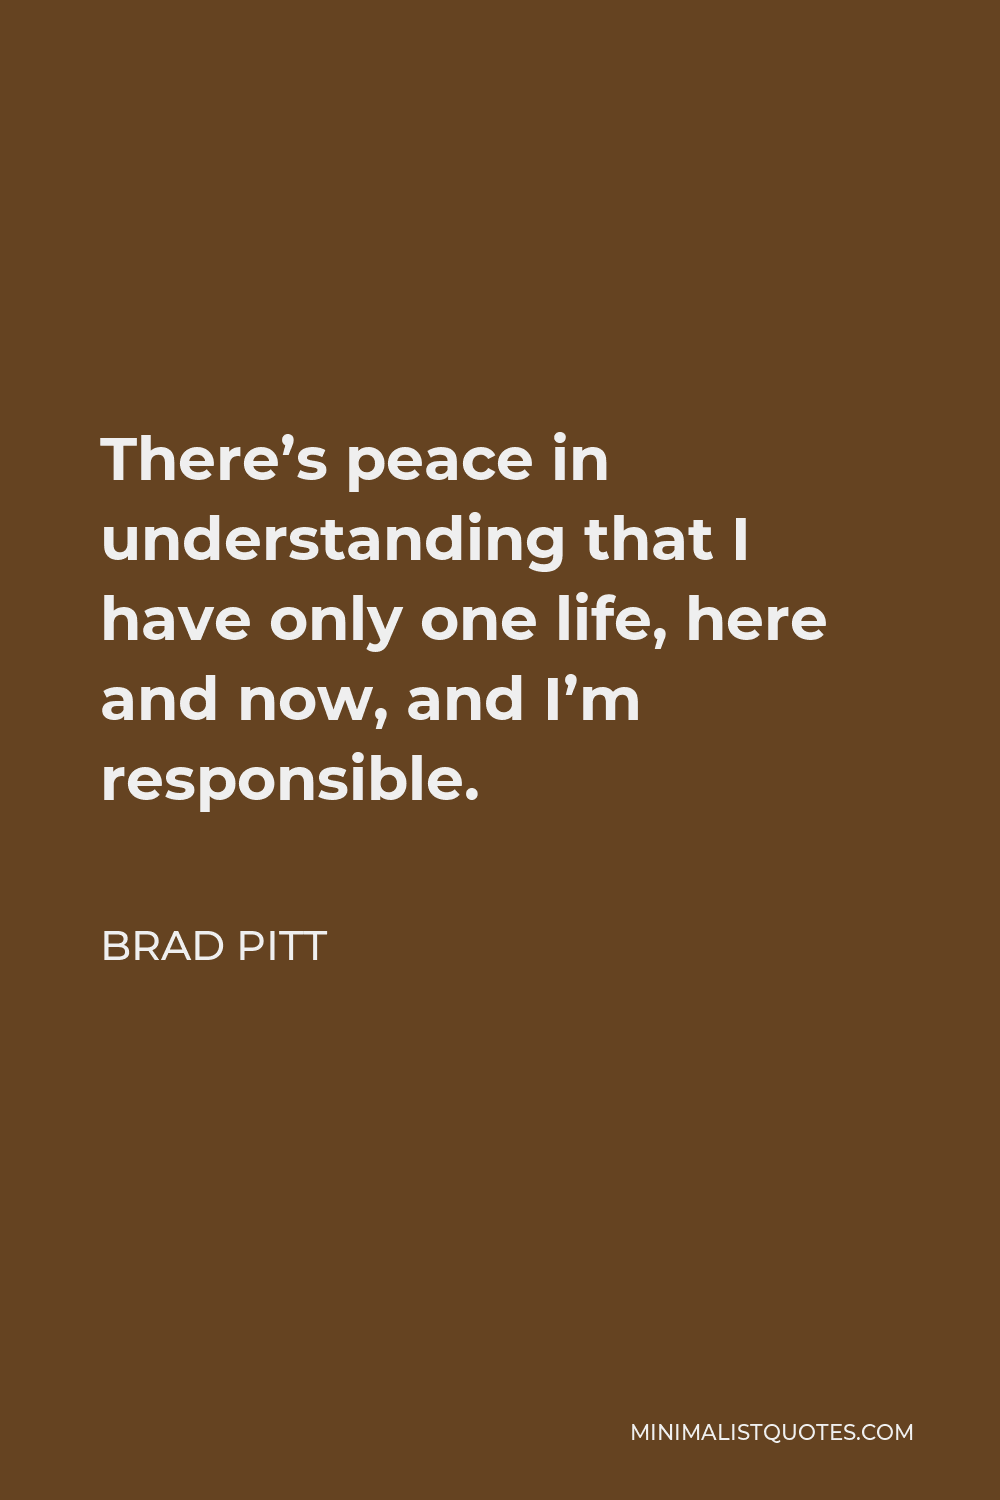 Brad Pitt Quote - There’s peace in understanding that I have only one life, here and now, and I’m responsible.